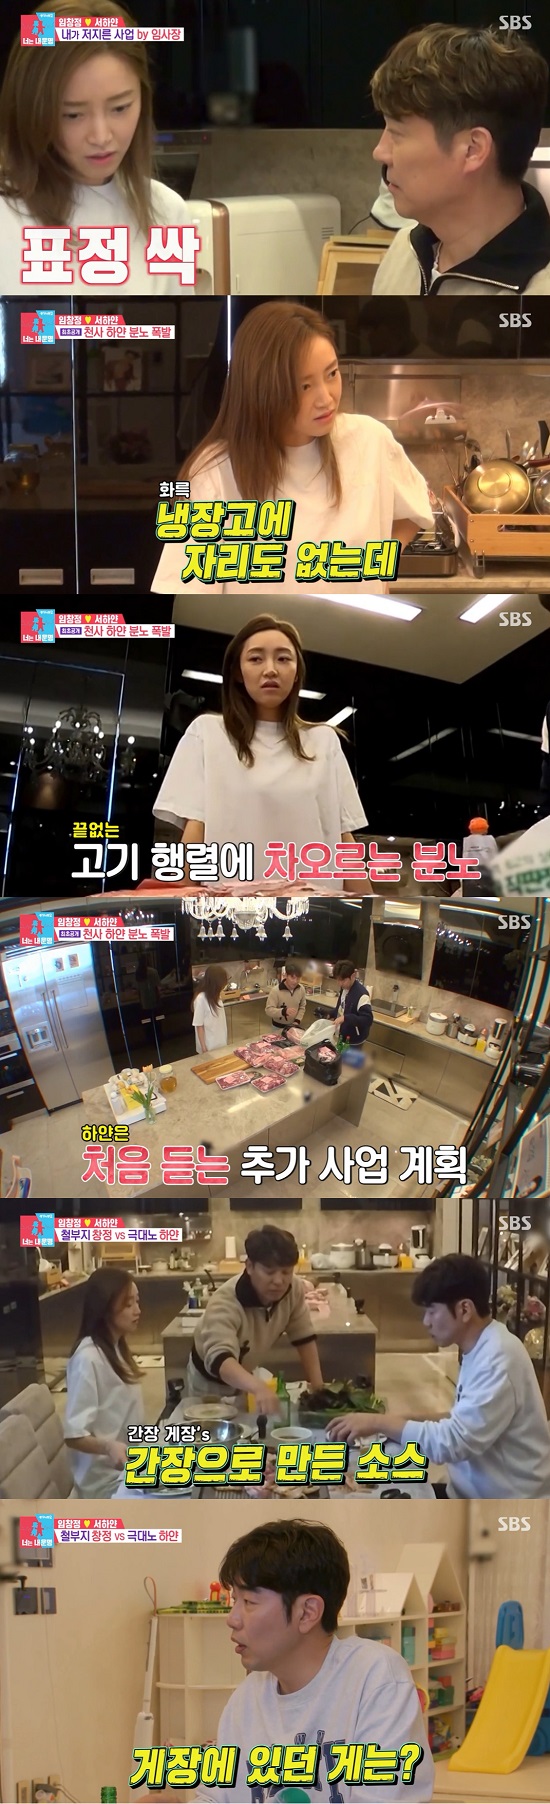 On SBS Same Bed, Different Dreams 22 - You Are My Destiny broadcast on the 18th, the appearance of the West White - Im Chang-jung couple meeting Lee Jong-hyeok was broadcast.On the day of the show, Im Chang-jung envisioned a new business and showed his best friend Lee Jong-hyeok and buying a large amount of pork.Im Chang-jung bought the meat and arrived home with Lee Jong-hyeok.West White was surprised by the amount of huge meat and said, What is this?The cast members in the studio were surprised to say, I saw such a white seed for the first time. Seo Haiyan said, I was worried about the refrigerator being full, and I wrinkled my eyes (I wrote an impression).Im Chang-jung said, I bought half a pig, and Seo Haiyan asked, How much is this?Lee Jong-hyeok said, Its about 500,000 won, and West Haiyan looked cold and said, Theres no room in the refrigerator?Embarrassed, Lee Jong-hyeok looked at the hint and replied, Were going to eat.Im Chang-jung said, We try it, find the best couple, he said. We may have a shop.West White said to his first business plan, Go? Im very joking. He then said, There is no room in the refrigerator. The beef is full.Seo Haiyan said, Why did you buy so much? And Im Chang-jung replied, We will make the pamuchim that we developed and try to eat with Jonghyuk.West White looked offended, and the cast in the studio said, Mr. White, thats really angry. Im Chang-jung noticed and set the meat.Eat it delicious and think again, said Seo Haiyan, who said, After eating food, I change my mind and give me a counter-proposal.At the studio, Gim Gu-ra said: There are some businesses that Mr Im Chang-jung has succeeded in, so its also ambiguous to oppose.Then he baked meat and continued his meal.Lee Jong-hyeok said, I do business with only a pamuchim. So Im Chang-jung gave Lee Jong-hyeok a wrap with a pamuchim saying that the taste would be different.Its just the same, right? Its like eating outside, West Haiyan said firmly.Lee Jong-hyeok responded with a gruesome response, saying, Is it okay? And Im Chang-jung said, Is that it?Lee Jong-hyeok tried only the pamul and said, I have a taste, but I do not think it is so special.Im Chang-jung has been making meat sauce, describing it as a sauce made of soy sauce in soy sauce.Seo Haiyan said, Where do you airlift soy sauce? Lee Jong-hyeok said, Soy sauce is not salty.Seeing the taste of the sauce, West White said, Its unusual, and Lee Jong-hyeok said, Its okay? Its subtle.Lee Jong-hyeok asked, What about the crabs in the crab? And West Hayan said, Yes.Im Chang-jung said, Ge can be given as a service. He showed a cool appearance and laughed.Seo Hae-yan said, It does not make sense from one to ten. Lee Jong-hyeok said, I had a big Daegu house.If you dont do anything, nothing happens - you have to do something, Im Chang-jung said.Gim Gu-ra sympathized with Im Chang-jung, saying, Im Chang-jung is better (business) and is more sorry because of Corona.Im Chang-jung was persuaded that we can pay back while we are in the rest of the business, and Seo Haiyan responded firmly, No, we have a lot of real loans.There are a lot of loans that have not been paid yet, and this house is also a monthly rent, he added.Seo Haiyan asked Im Chang-jung about the specific plan of what the staff would do, and Im Chang-jung replied, Employees should be minimized.Lee Jong-hyeok asked, Can you go and work?The cast members in the studio were surprised that this is all white seed work again and there are five children.Seo Haiyan said, Do not you mean to go and do it? I do not want to save money.Photo: SBS Same Bed, Different Dreams 22 - Youre My Destiny